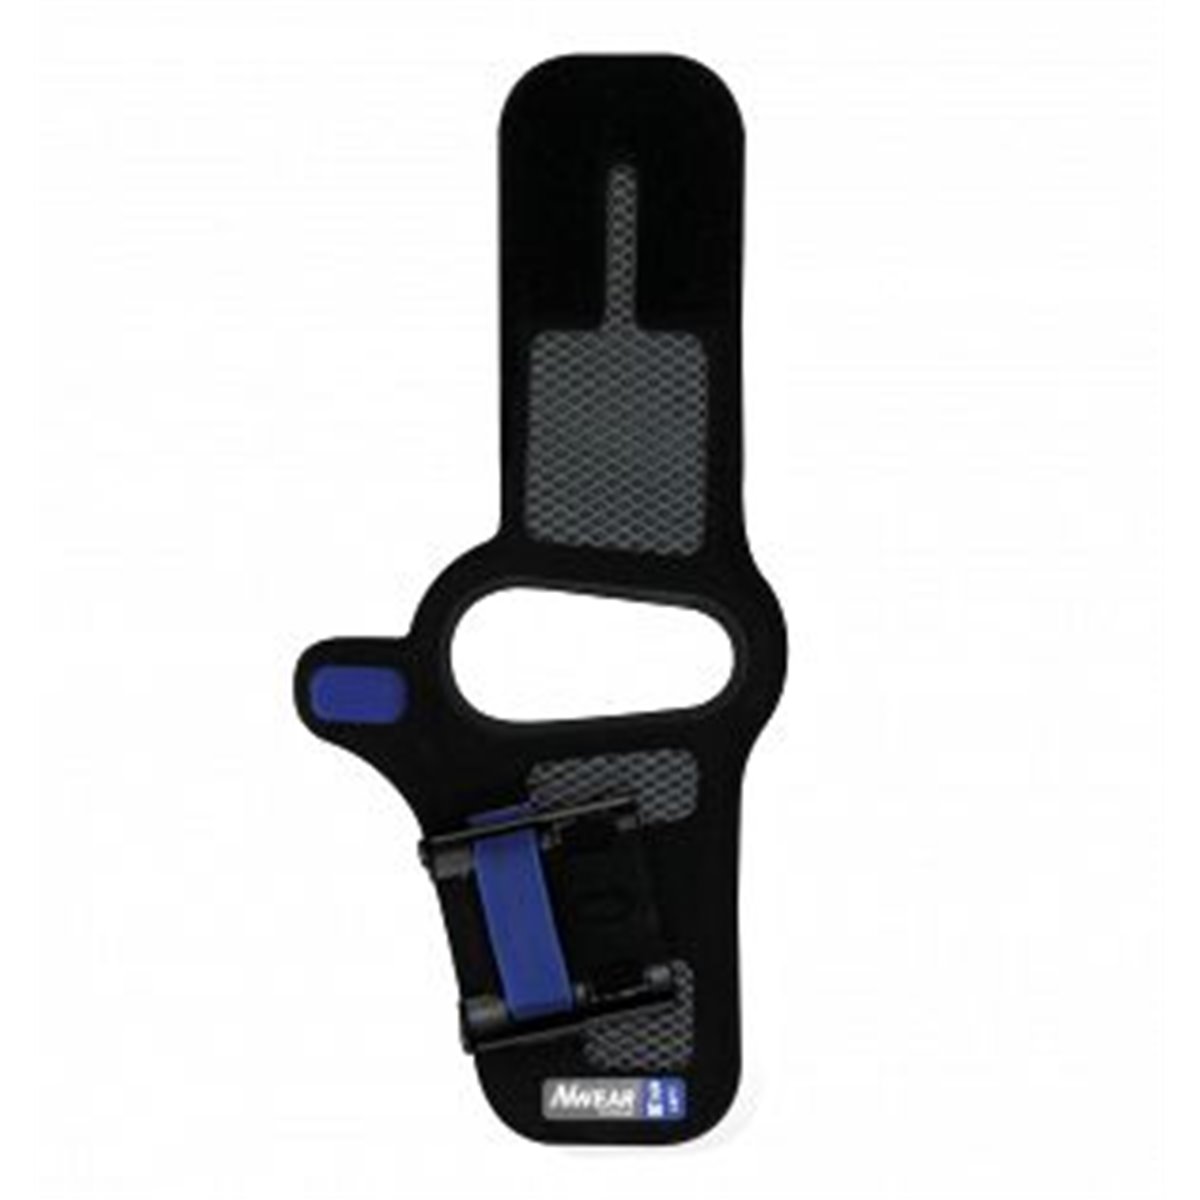 Newland Left hand Electronic strap for WD2-SR-MR - Small-Medium